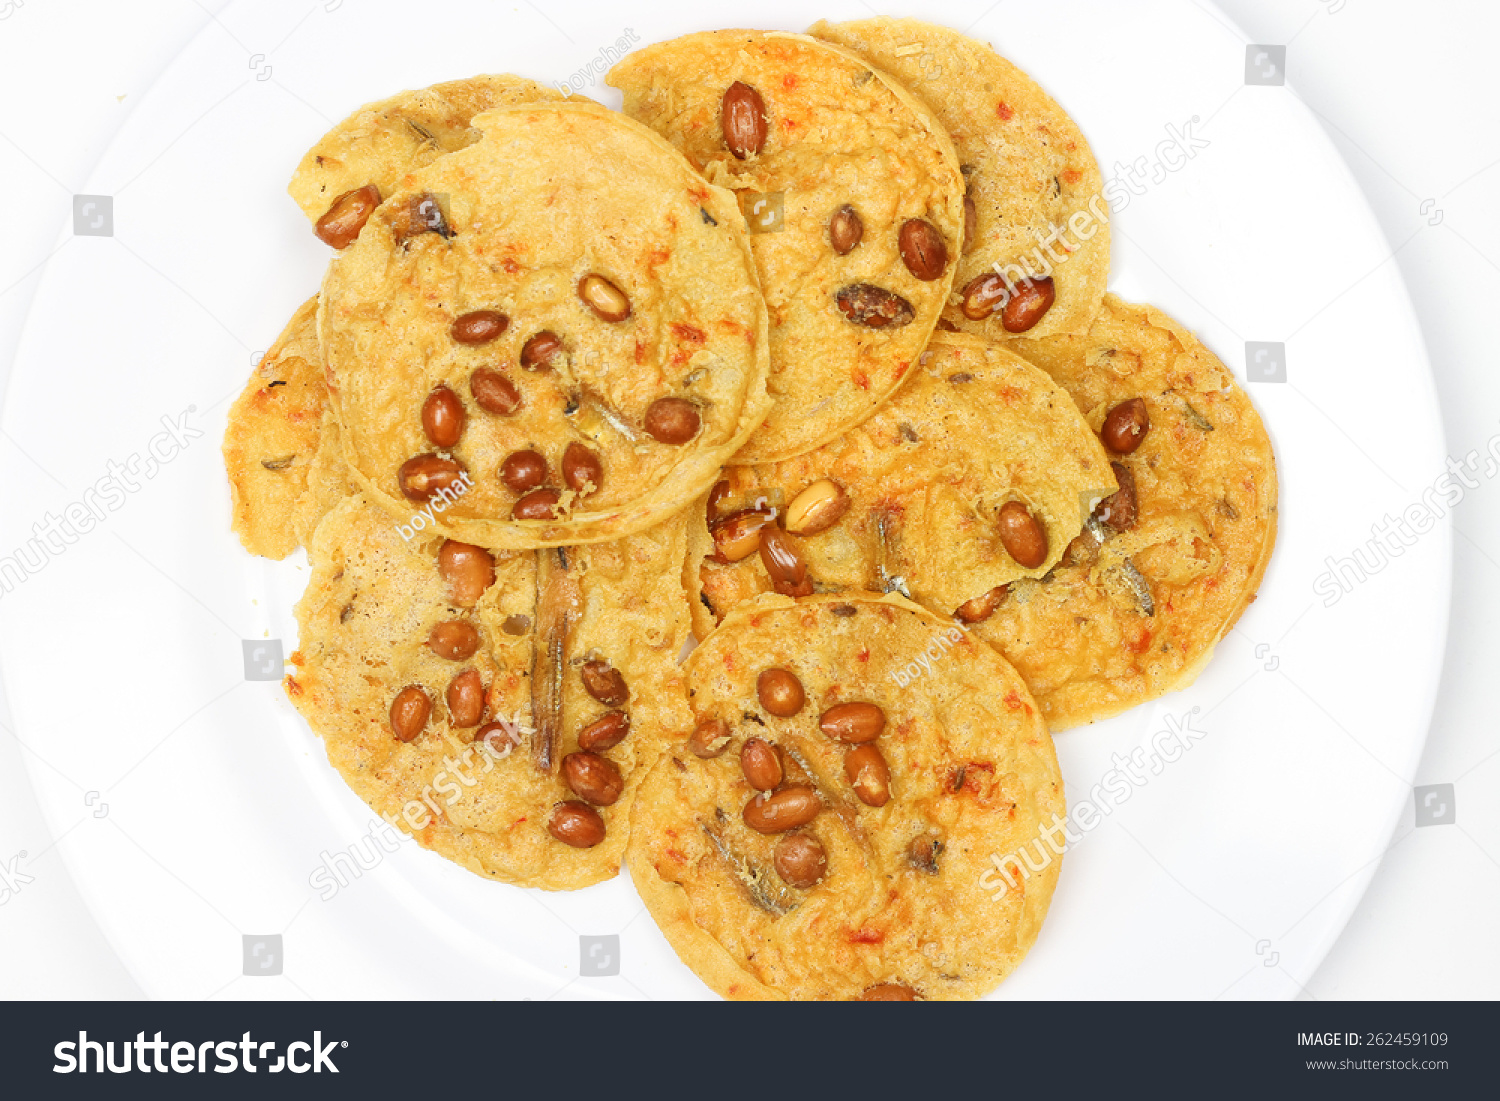 Malay Cookies Malaysian Cookies On White Stock Photo Edit Now 262459109